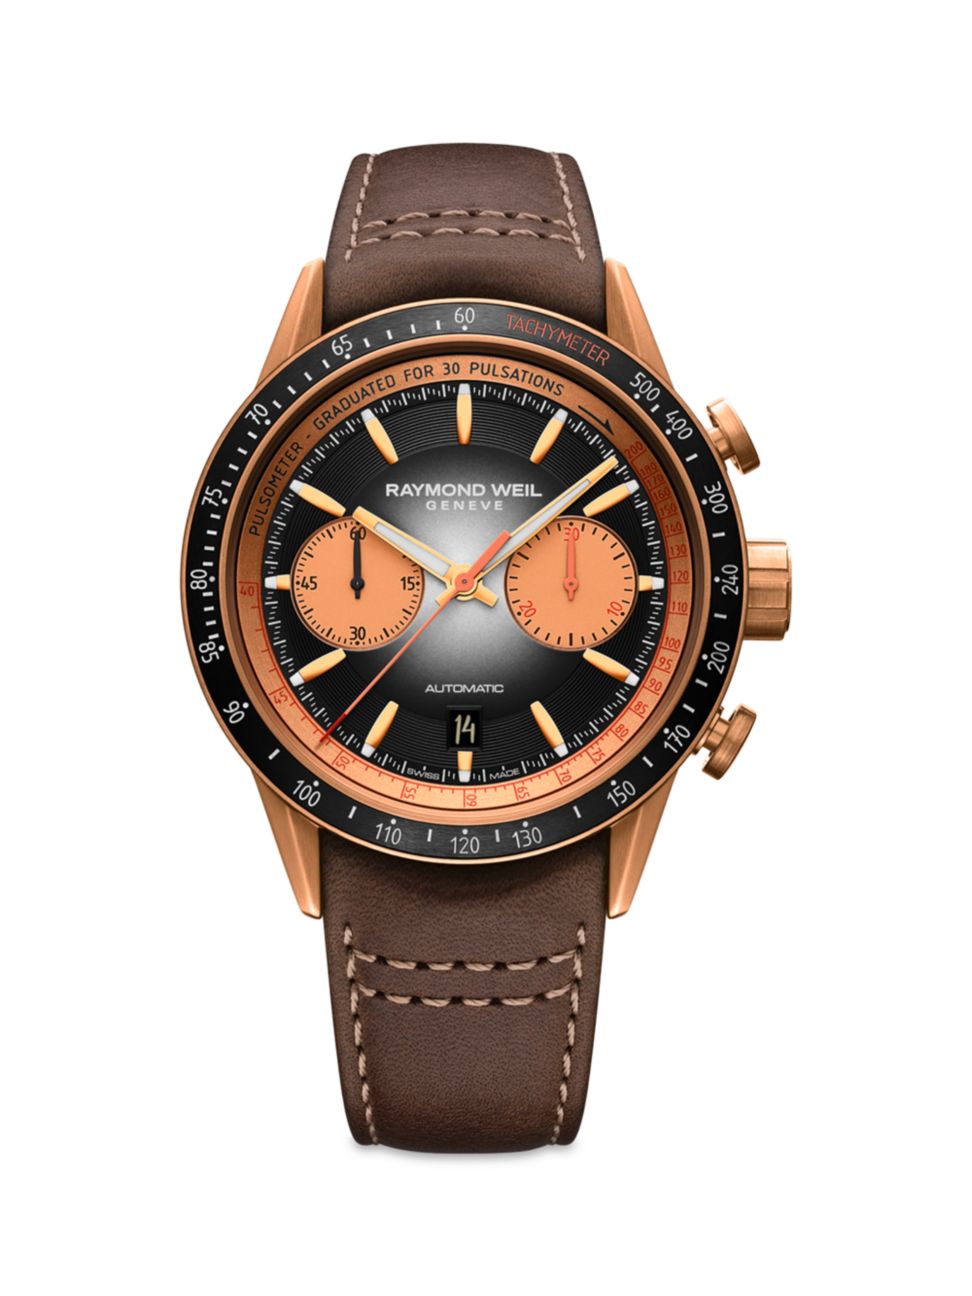 Raymond Weil Freelancer Men's Automatic Chronograph Bi-Compax Bronze Leather Watch 43.5mm Limited Edition